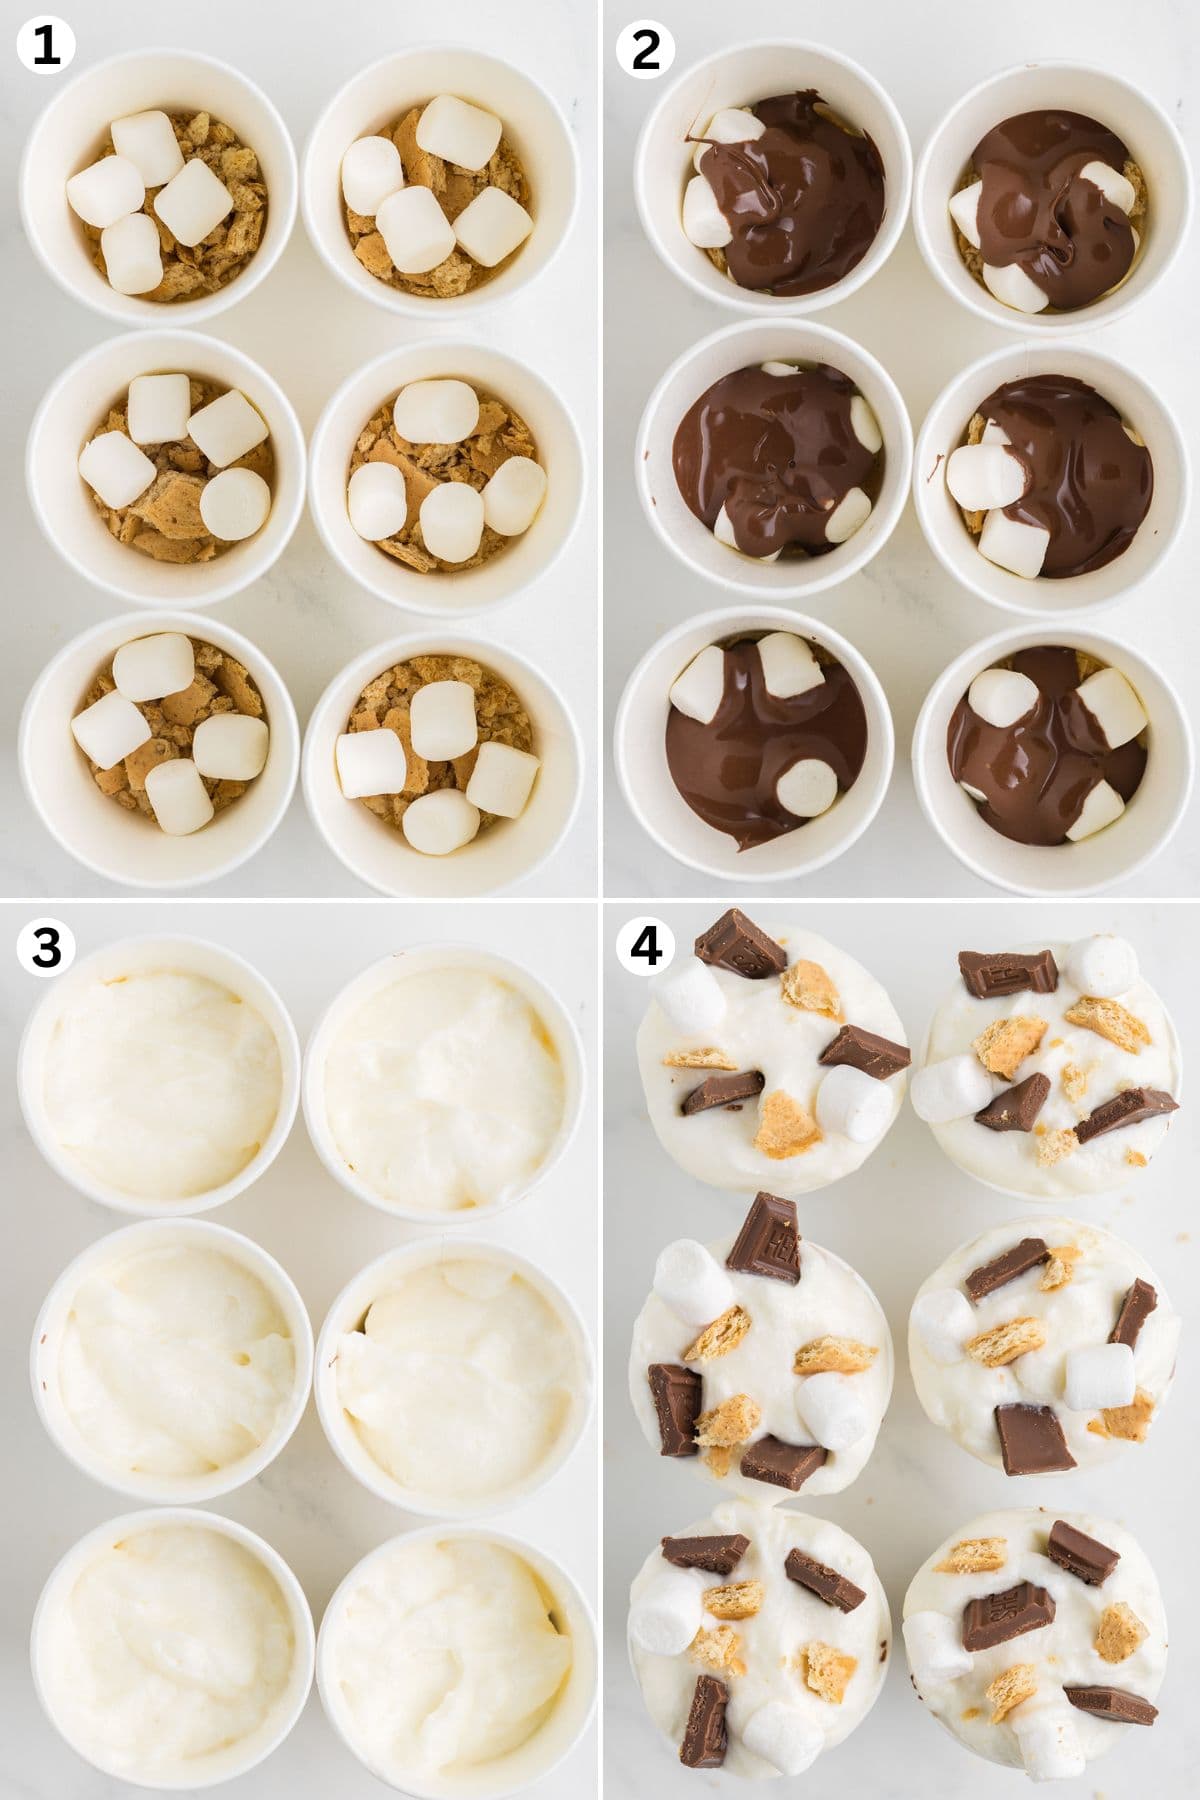 Ina dixie cup, add a layer of crushed graham crackers followed by mini marshmallows. Pour the melted chocolate. Then the marshmallow mixture. Repeat all layers and top with chopped chocolate and graham crackers.